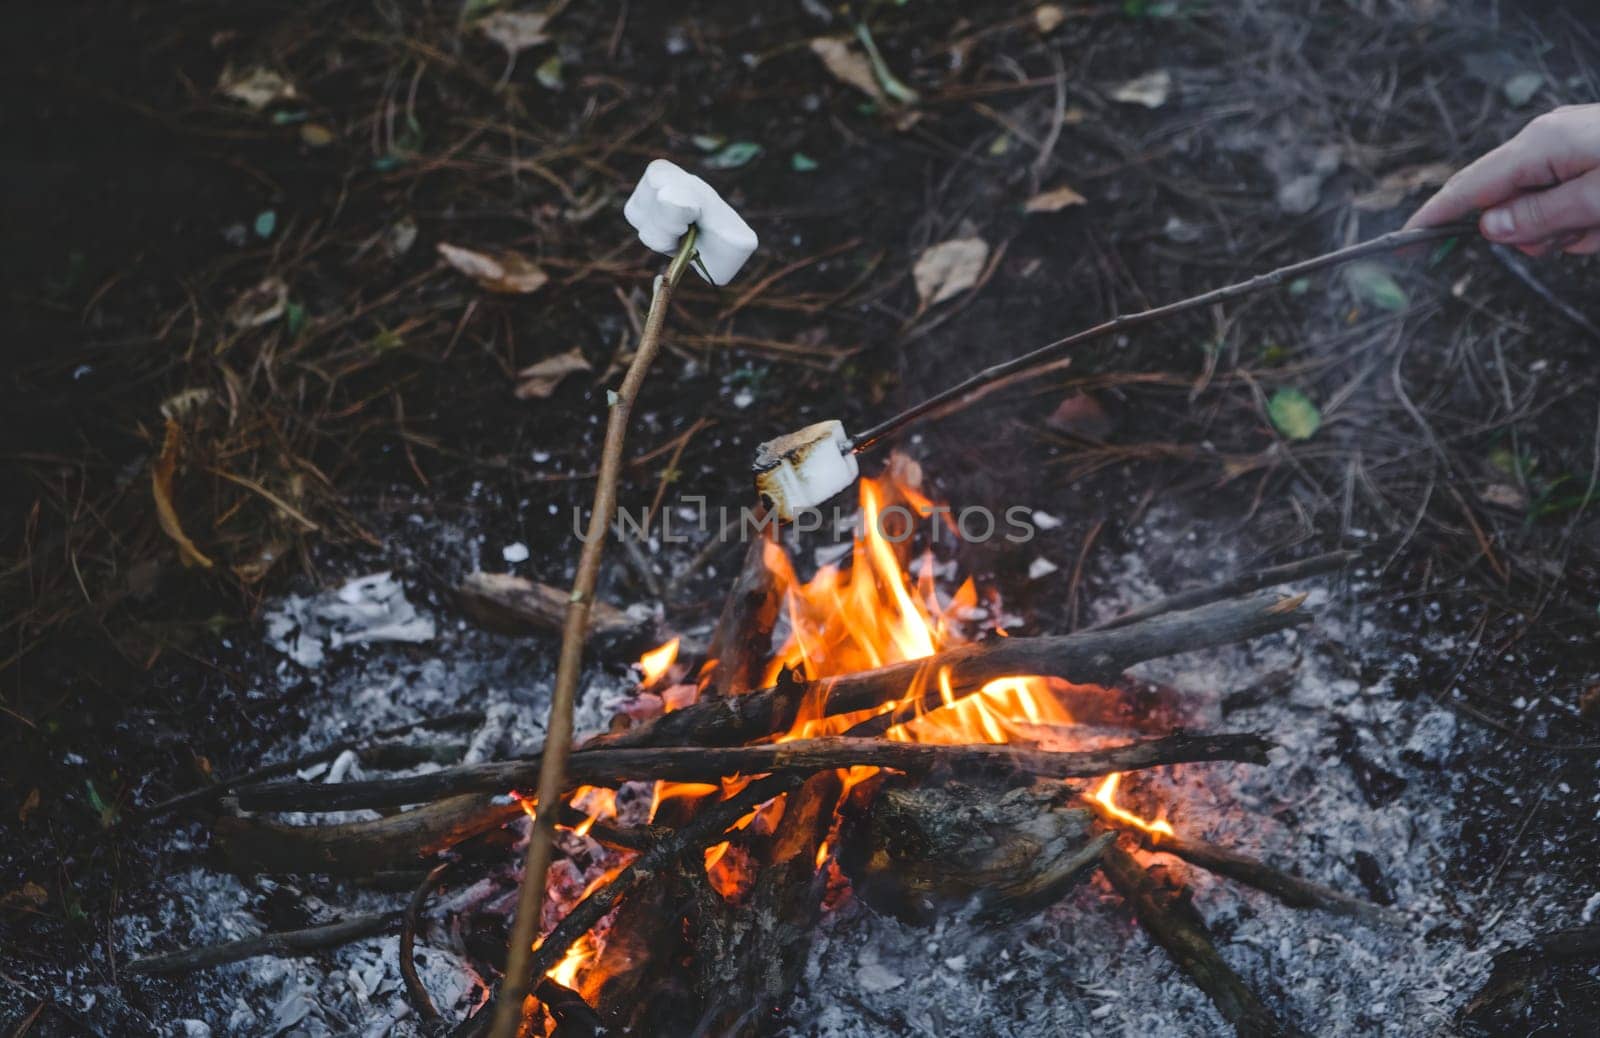 Marshmallow roasting hand drawn. Marshmallows on skewers in night camping fire. Wood campfire background by igor010